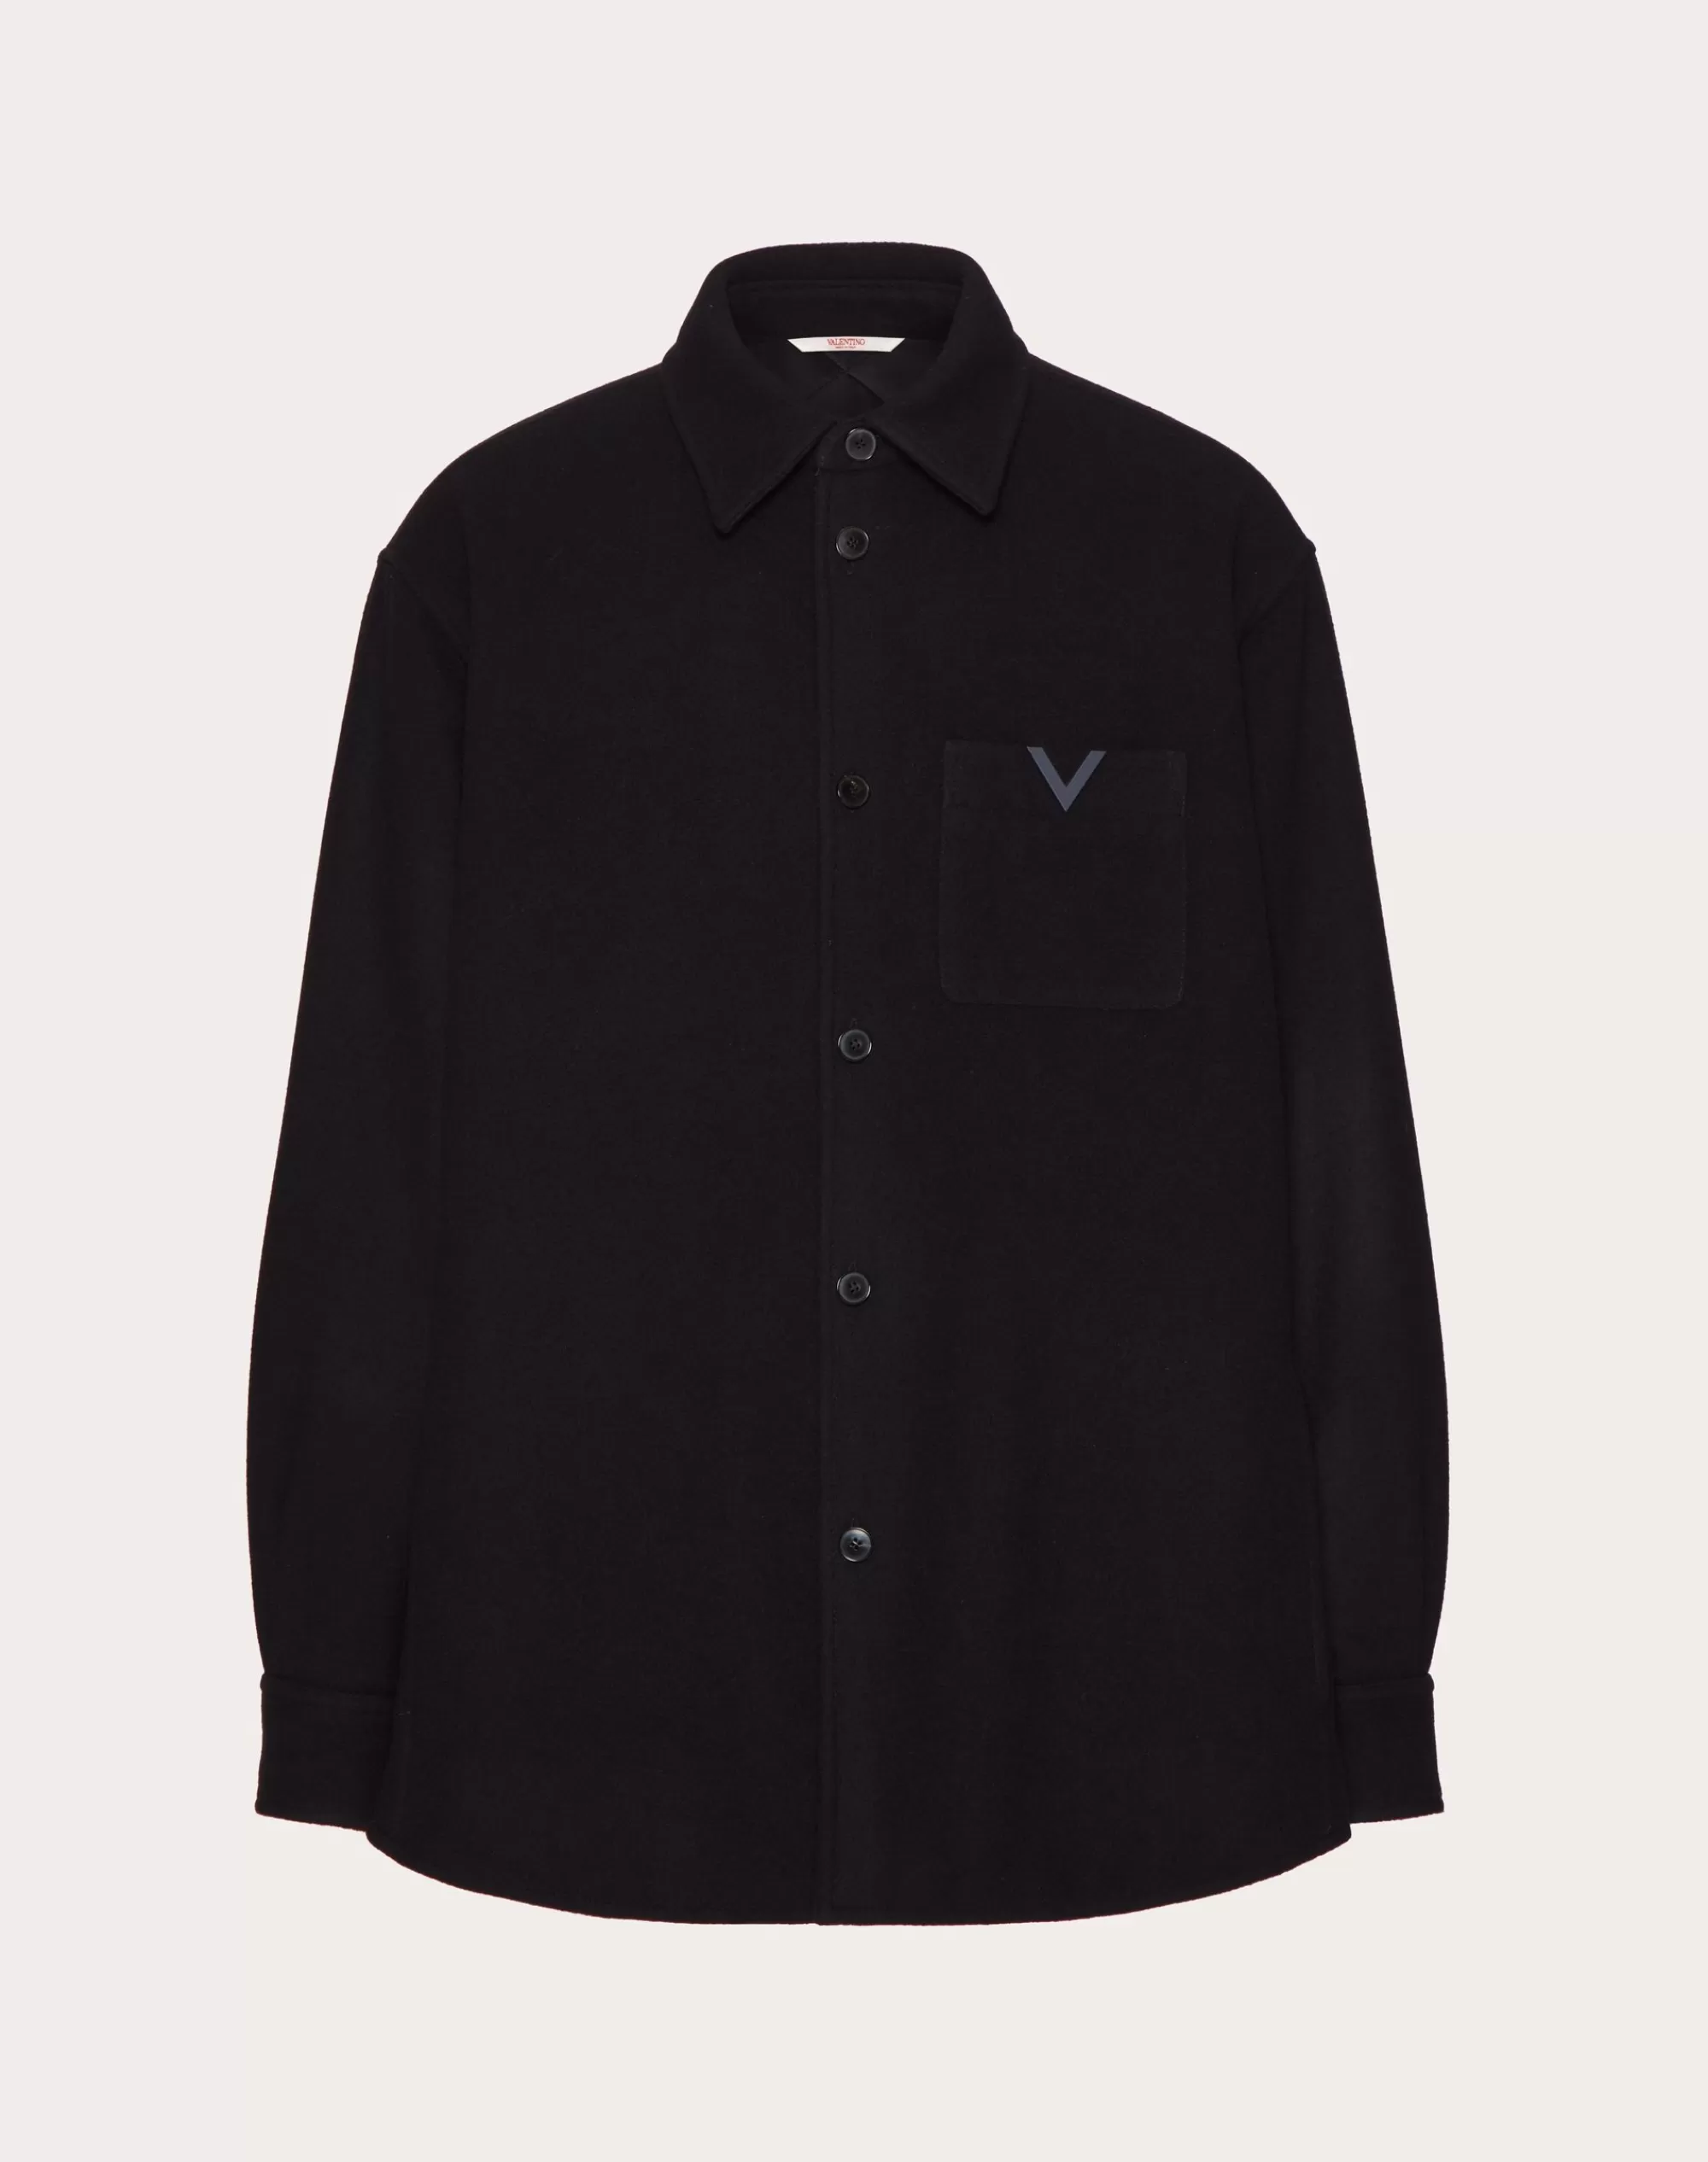 Valentino TECHNICAL WOOL CLOTH SHIRT JACKET WITH RUBBERIZED V DETAIL Navy Store